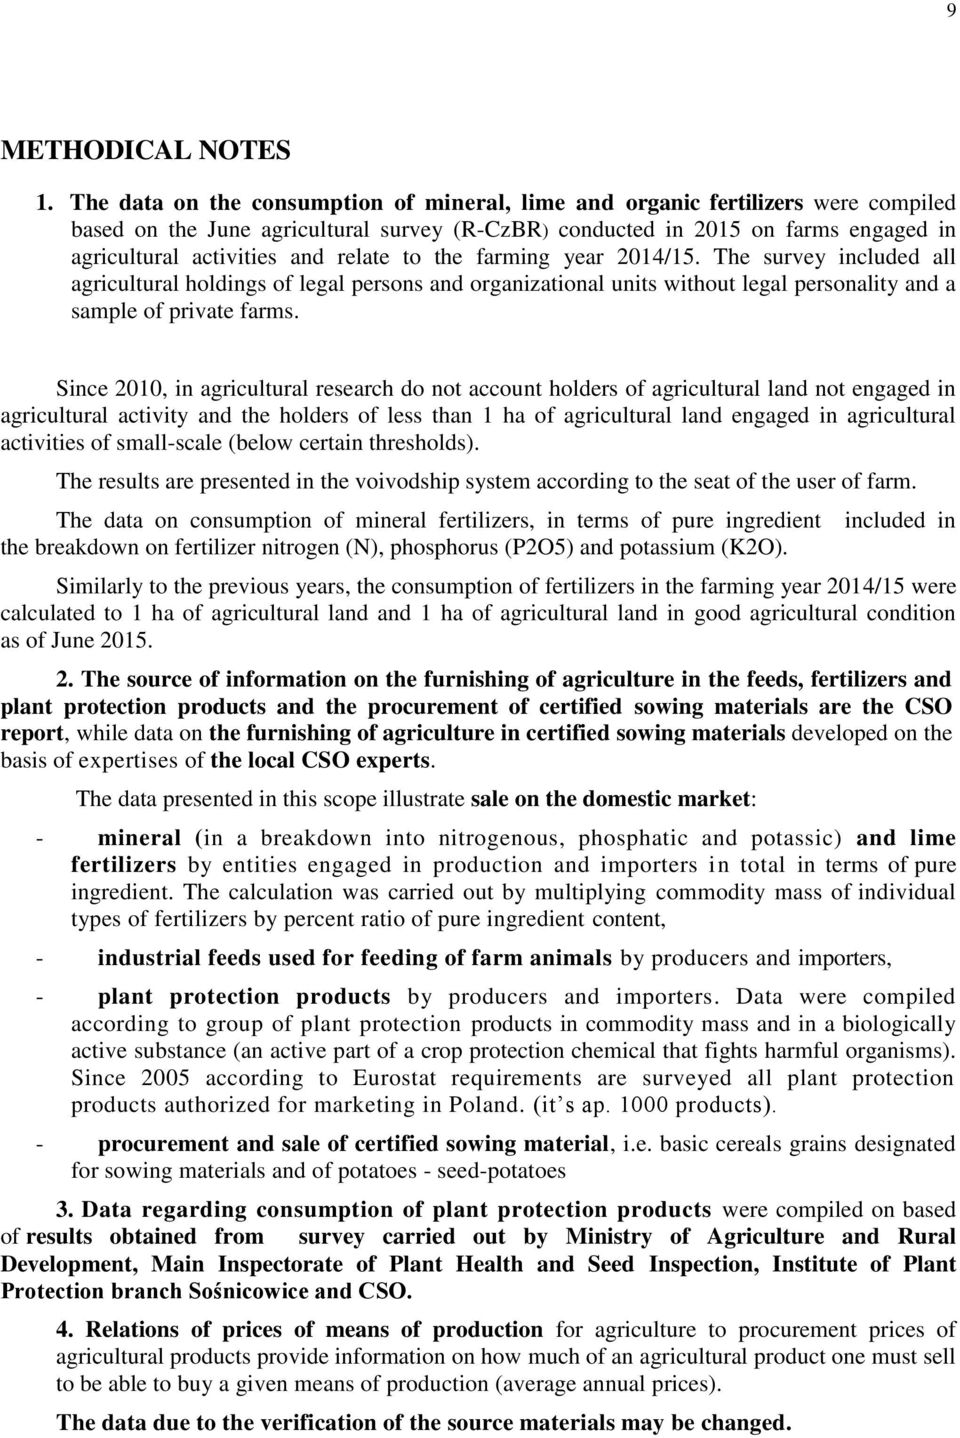 relate to the farming year 2014/15. The survey included all agricultural holdings of legal persons and organizational units without legal personality and a sample of private farms.